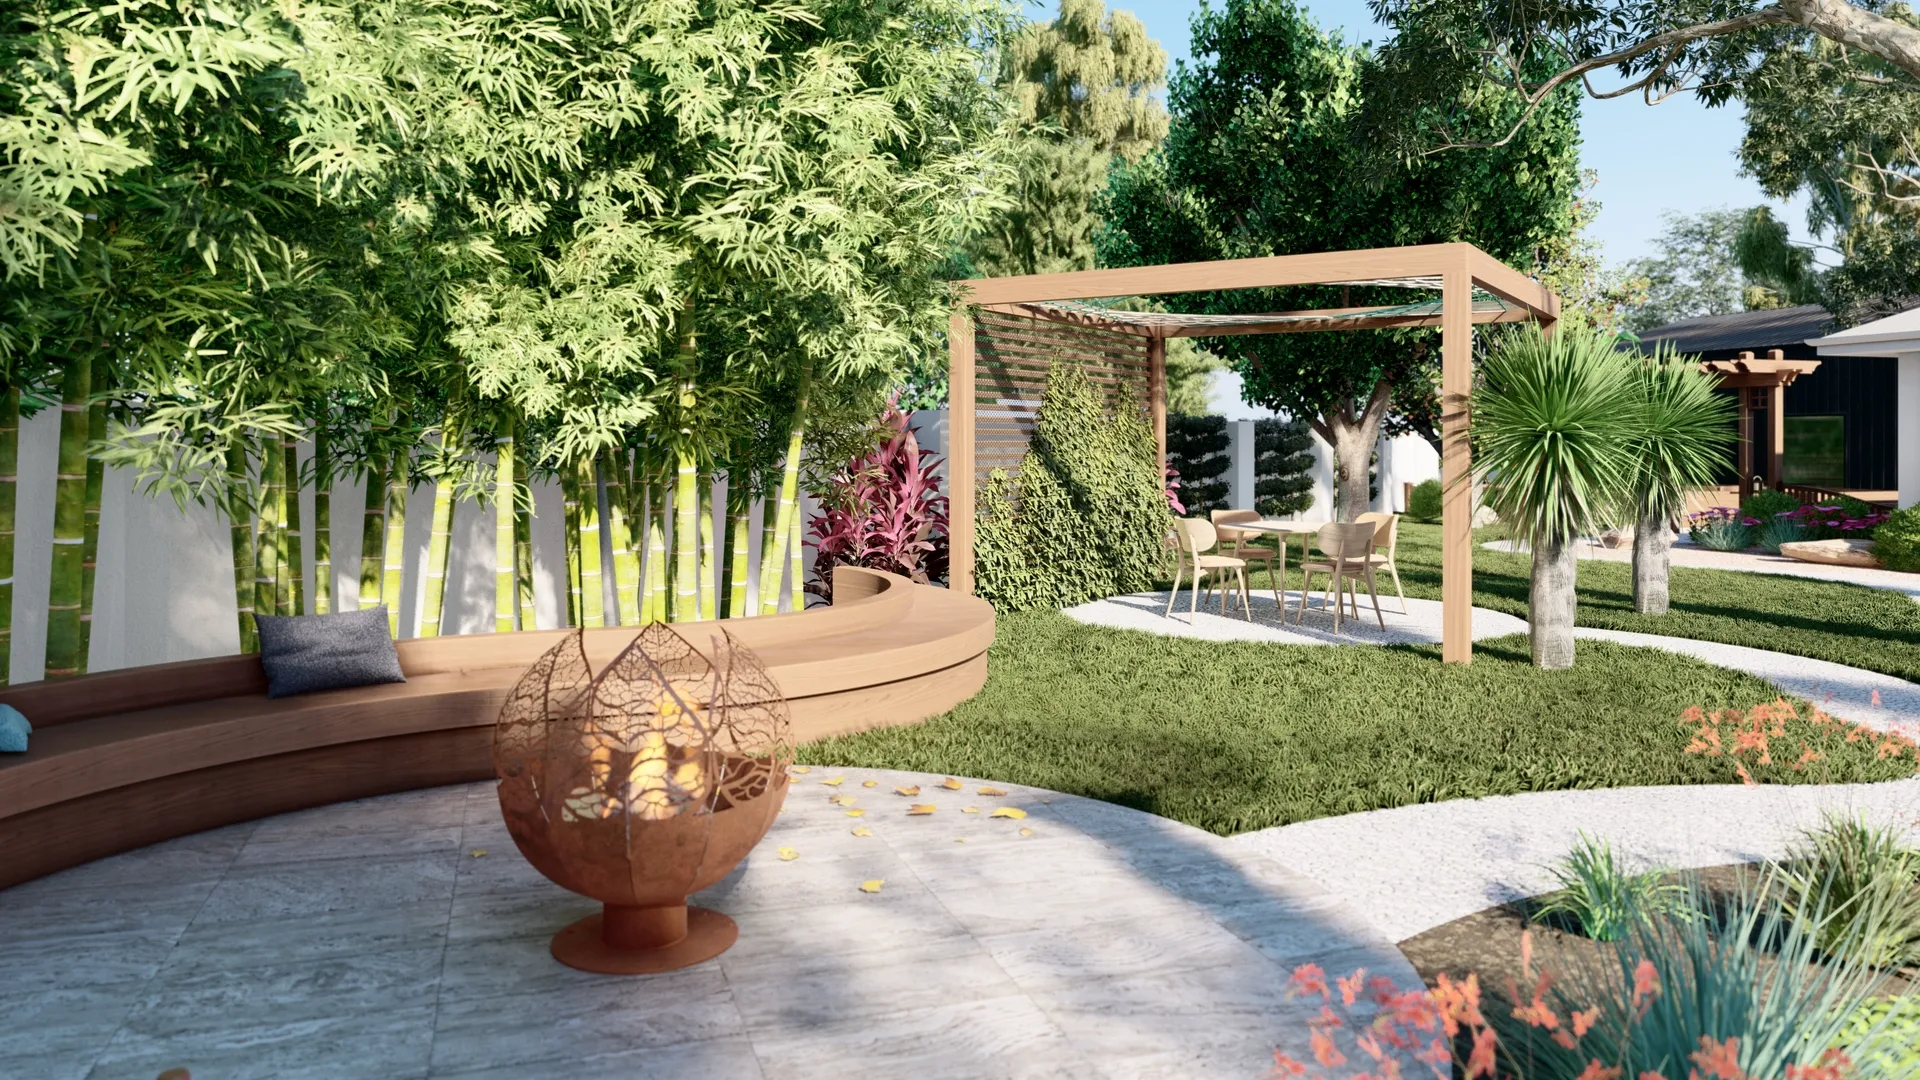 Design Scapes | Designing Themed Gardens: Crafting 2D Masterpieces